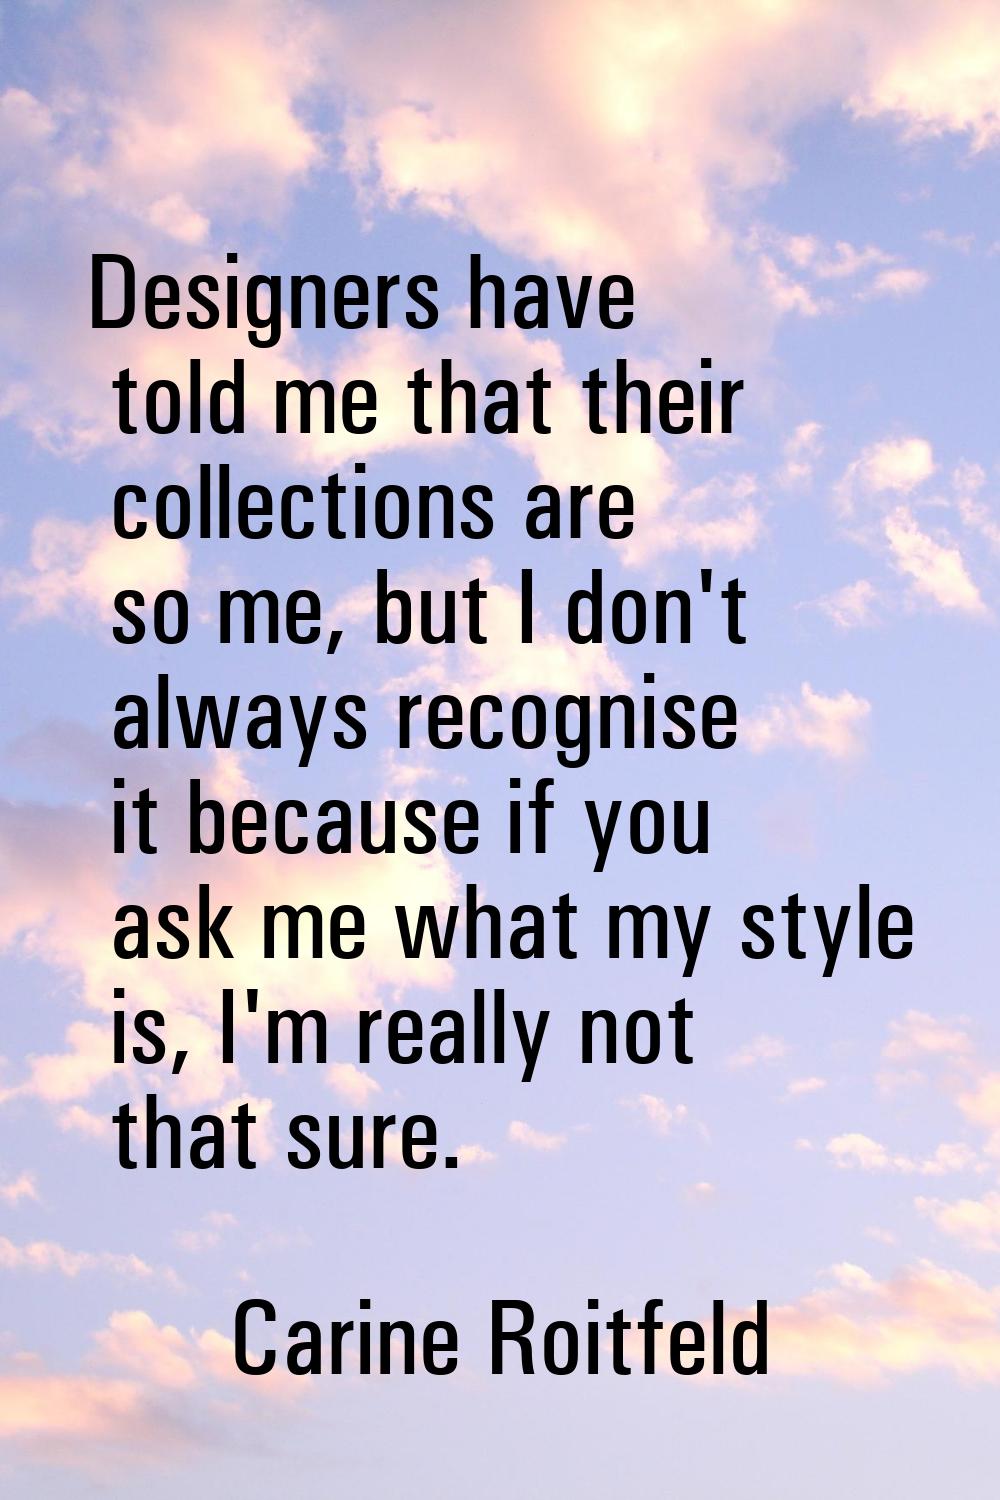 Designers have told me that their collections are so me, but I don't always recognise it because if